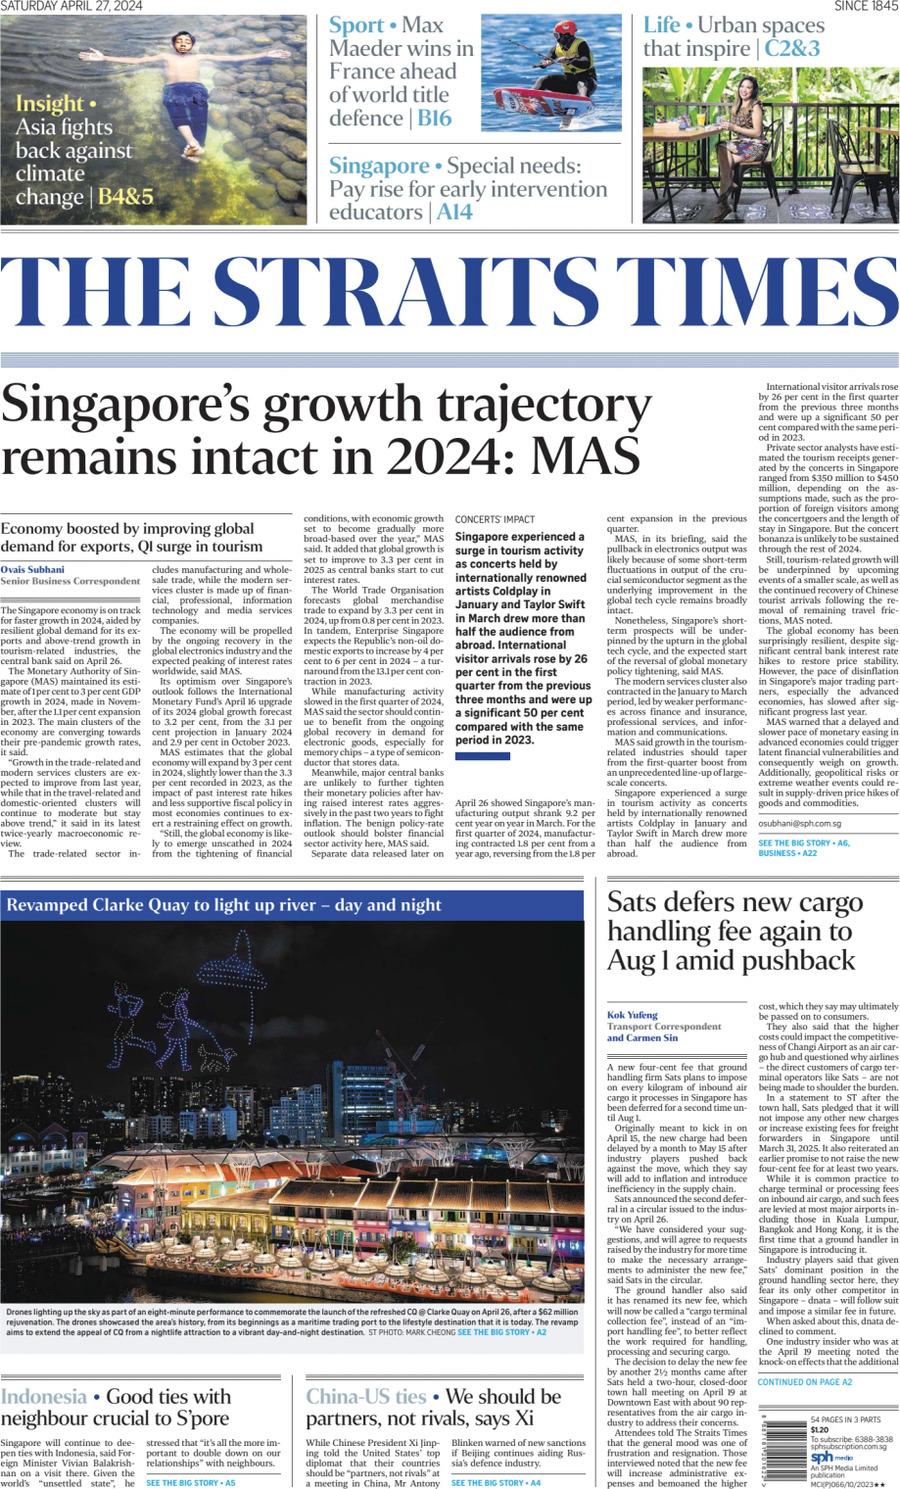 The Straits Times - Front Page - 04/27/2024